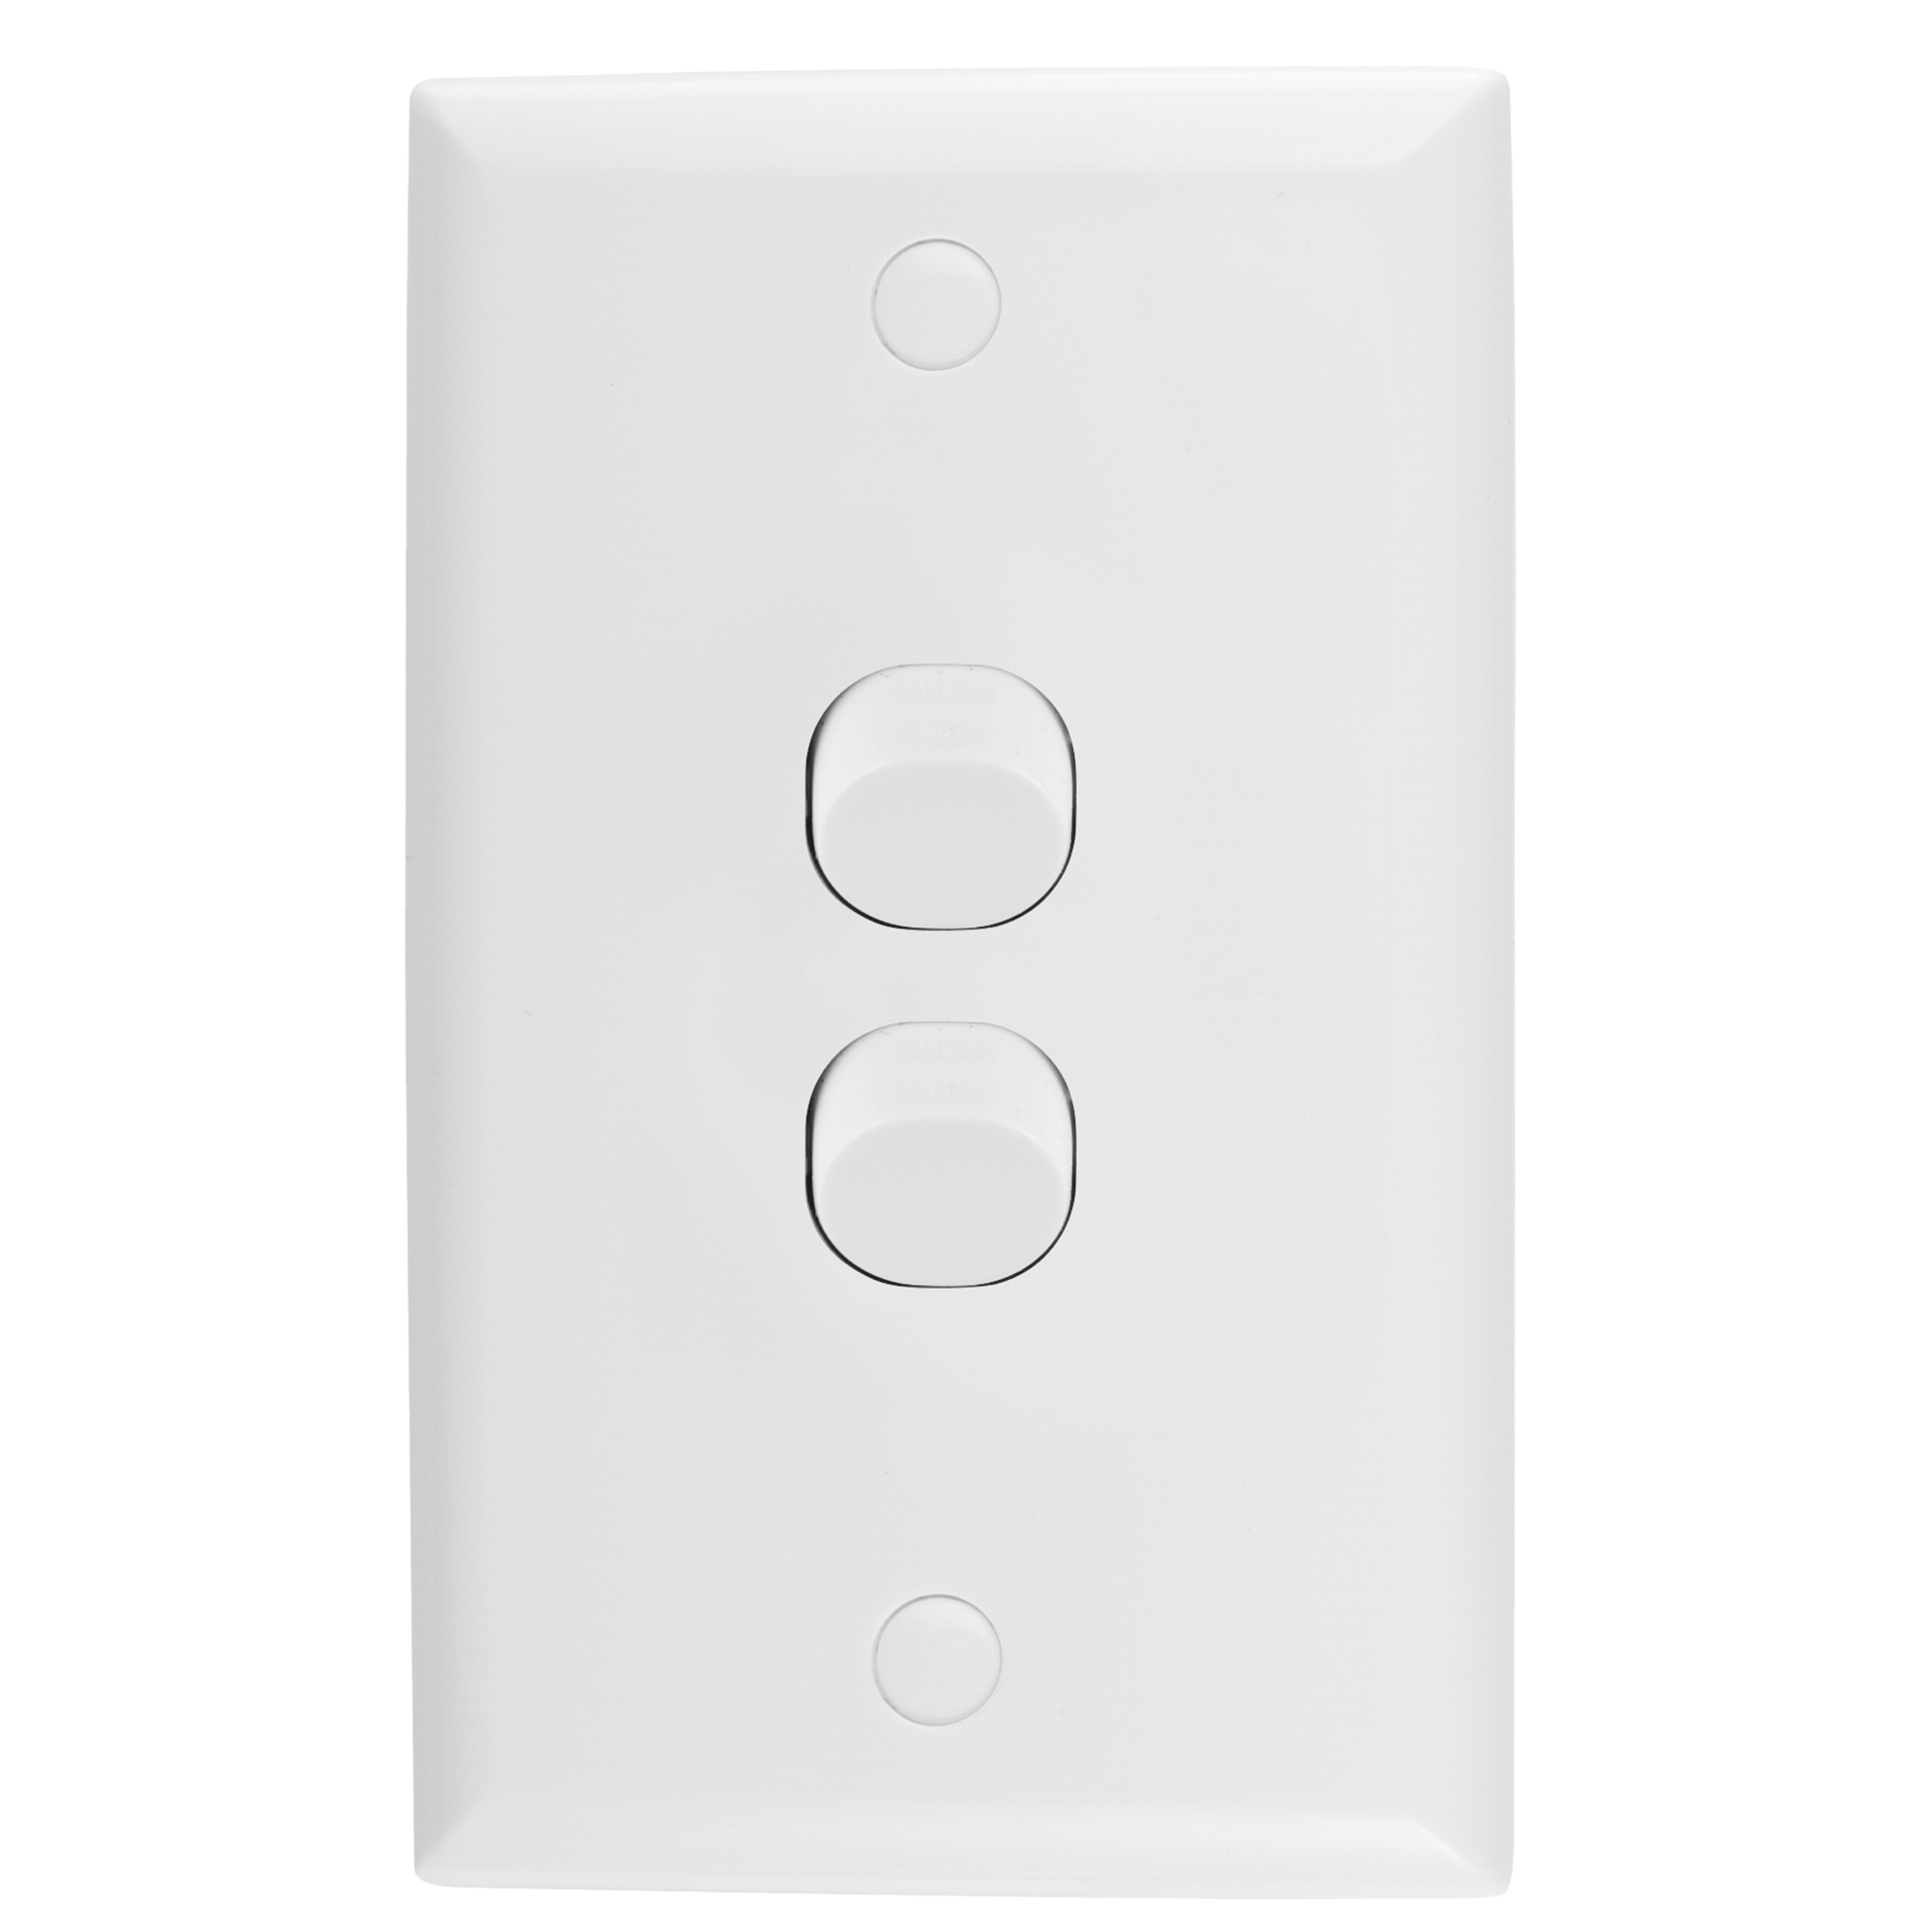  Double vertical wall switch